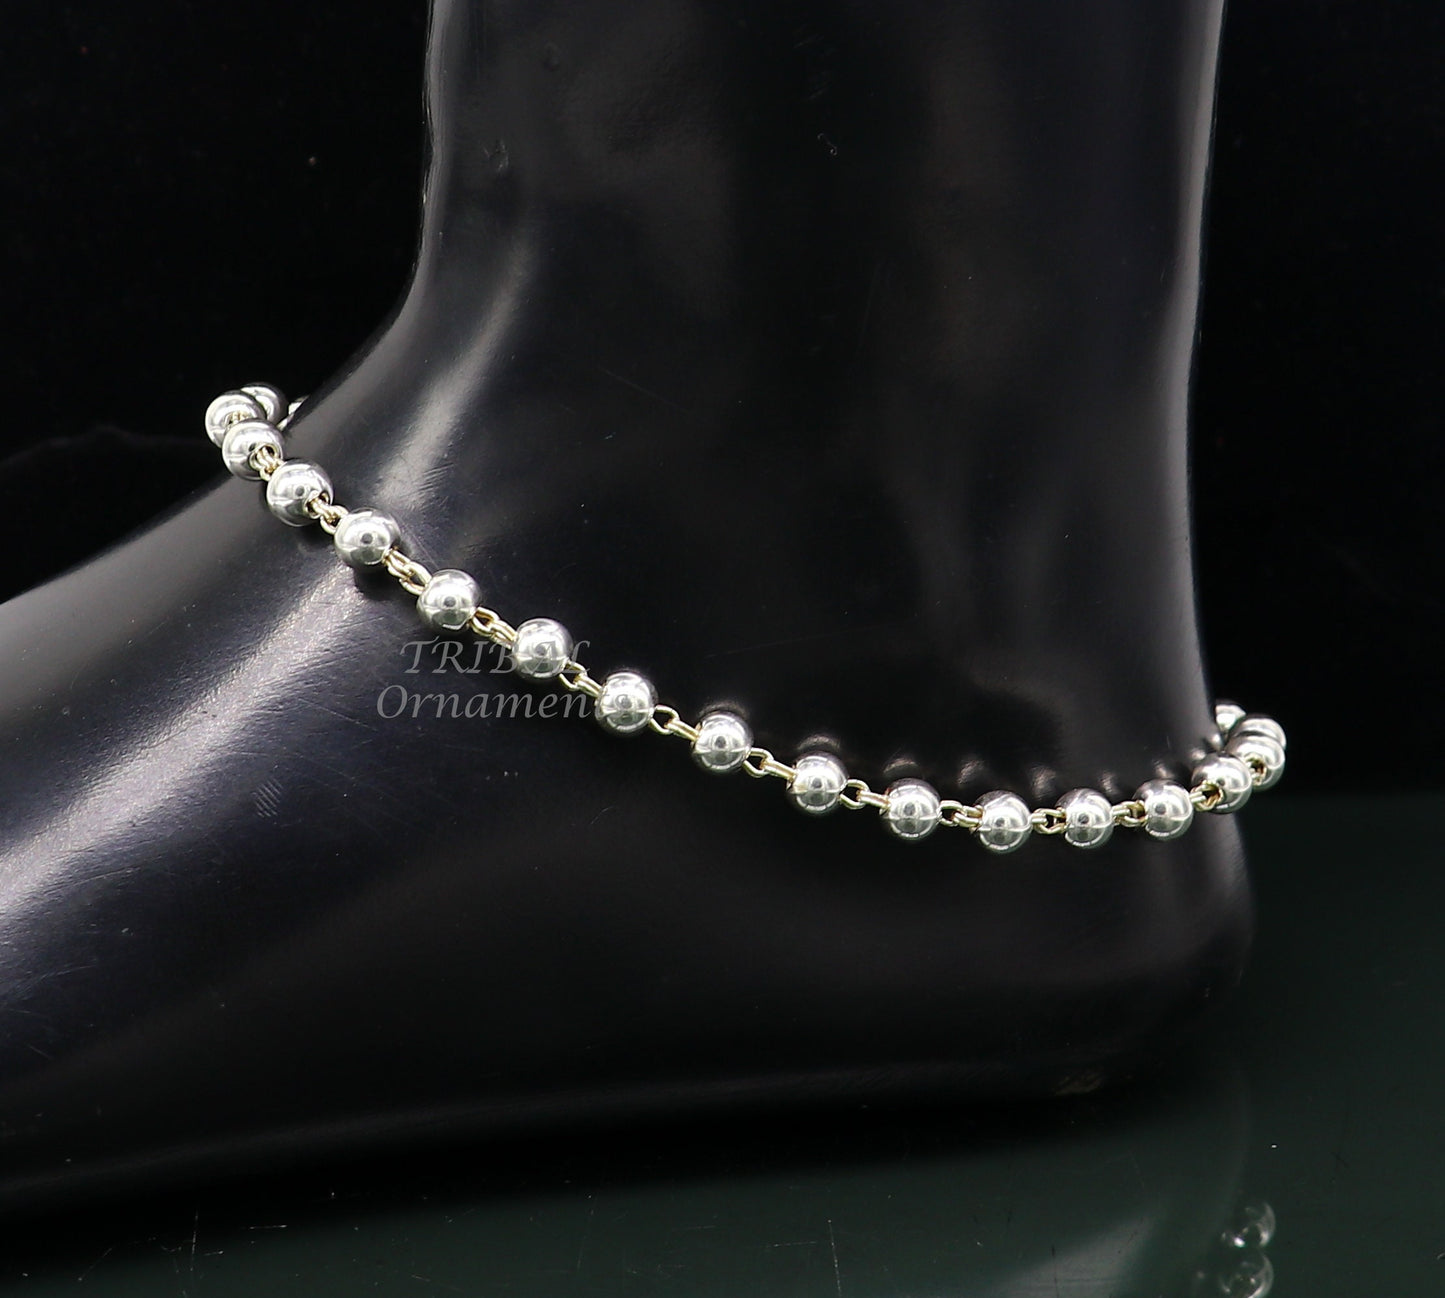 6mm 925 sterling silver beaded/ball chain anklet bracelet amazing light weight delicate anklets gorgeous belly dance silver jewelry ank536 - TRIBAL ORNAMENTS